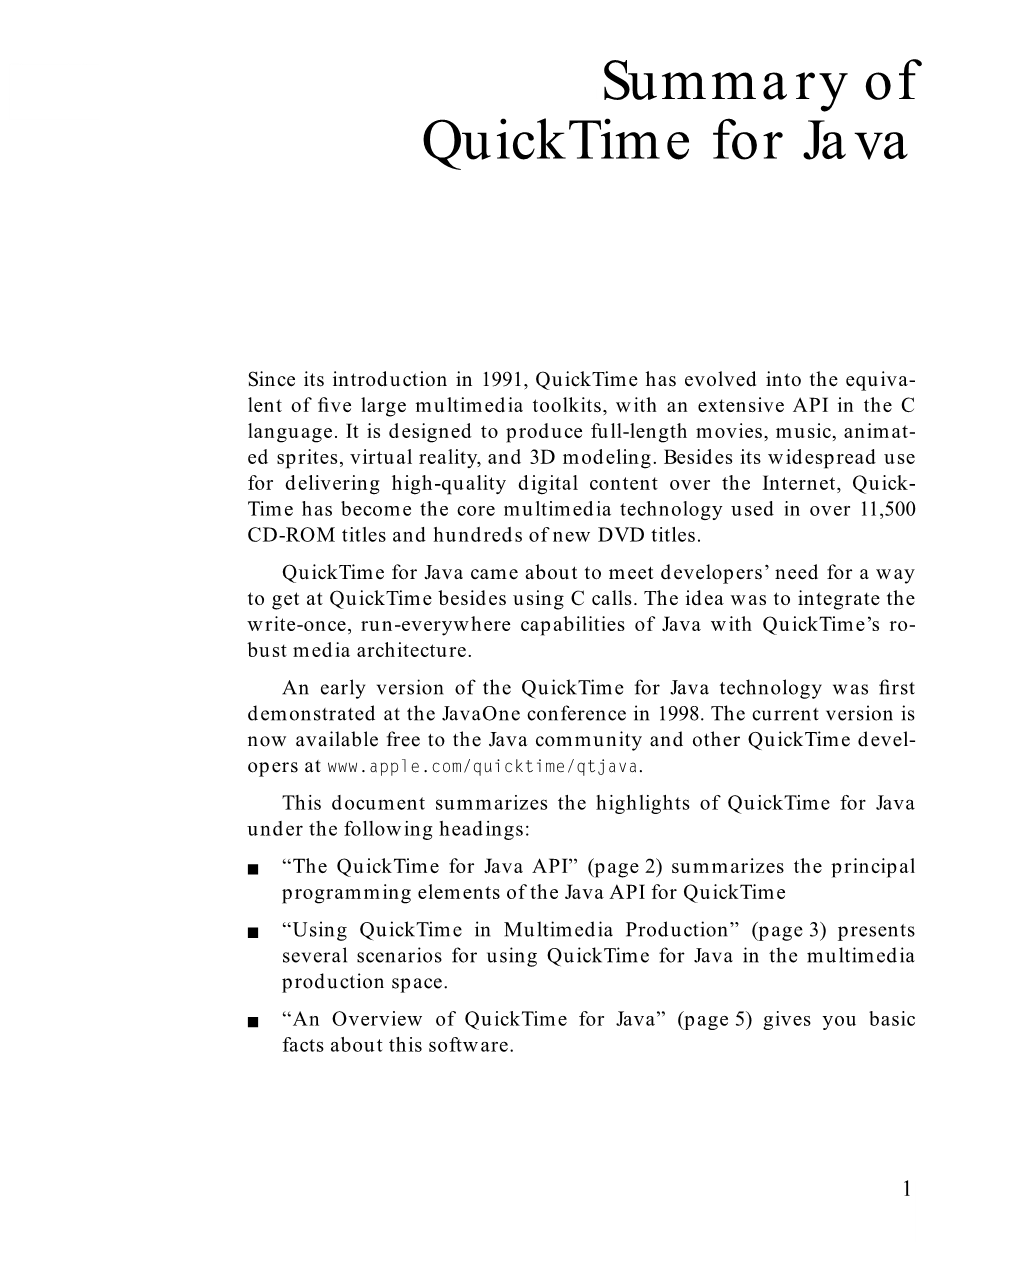 Summary of Quicktime for Java